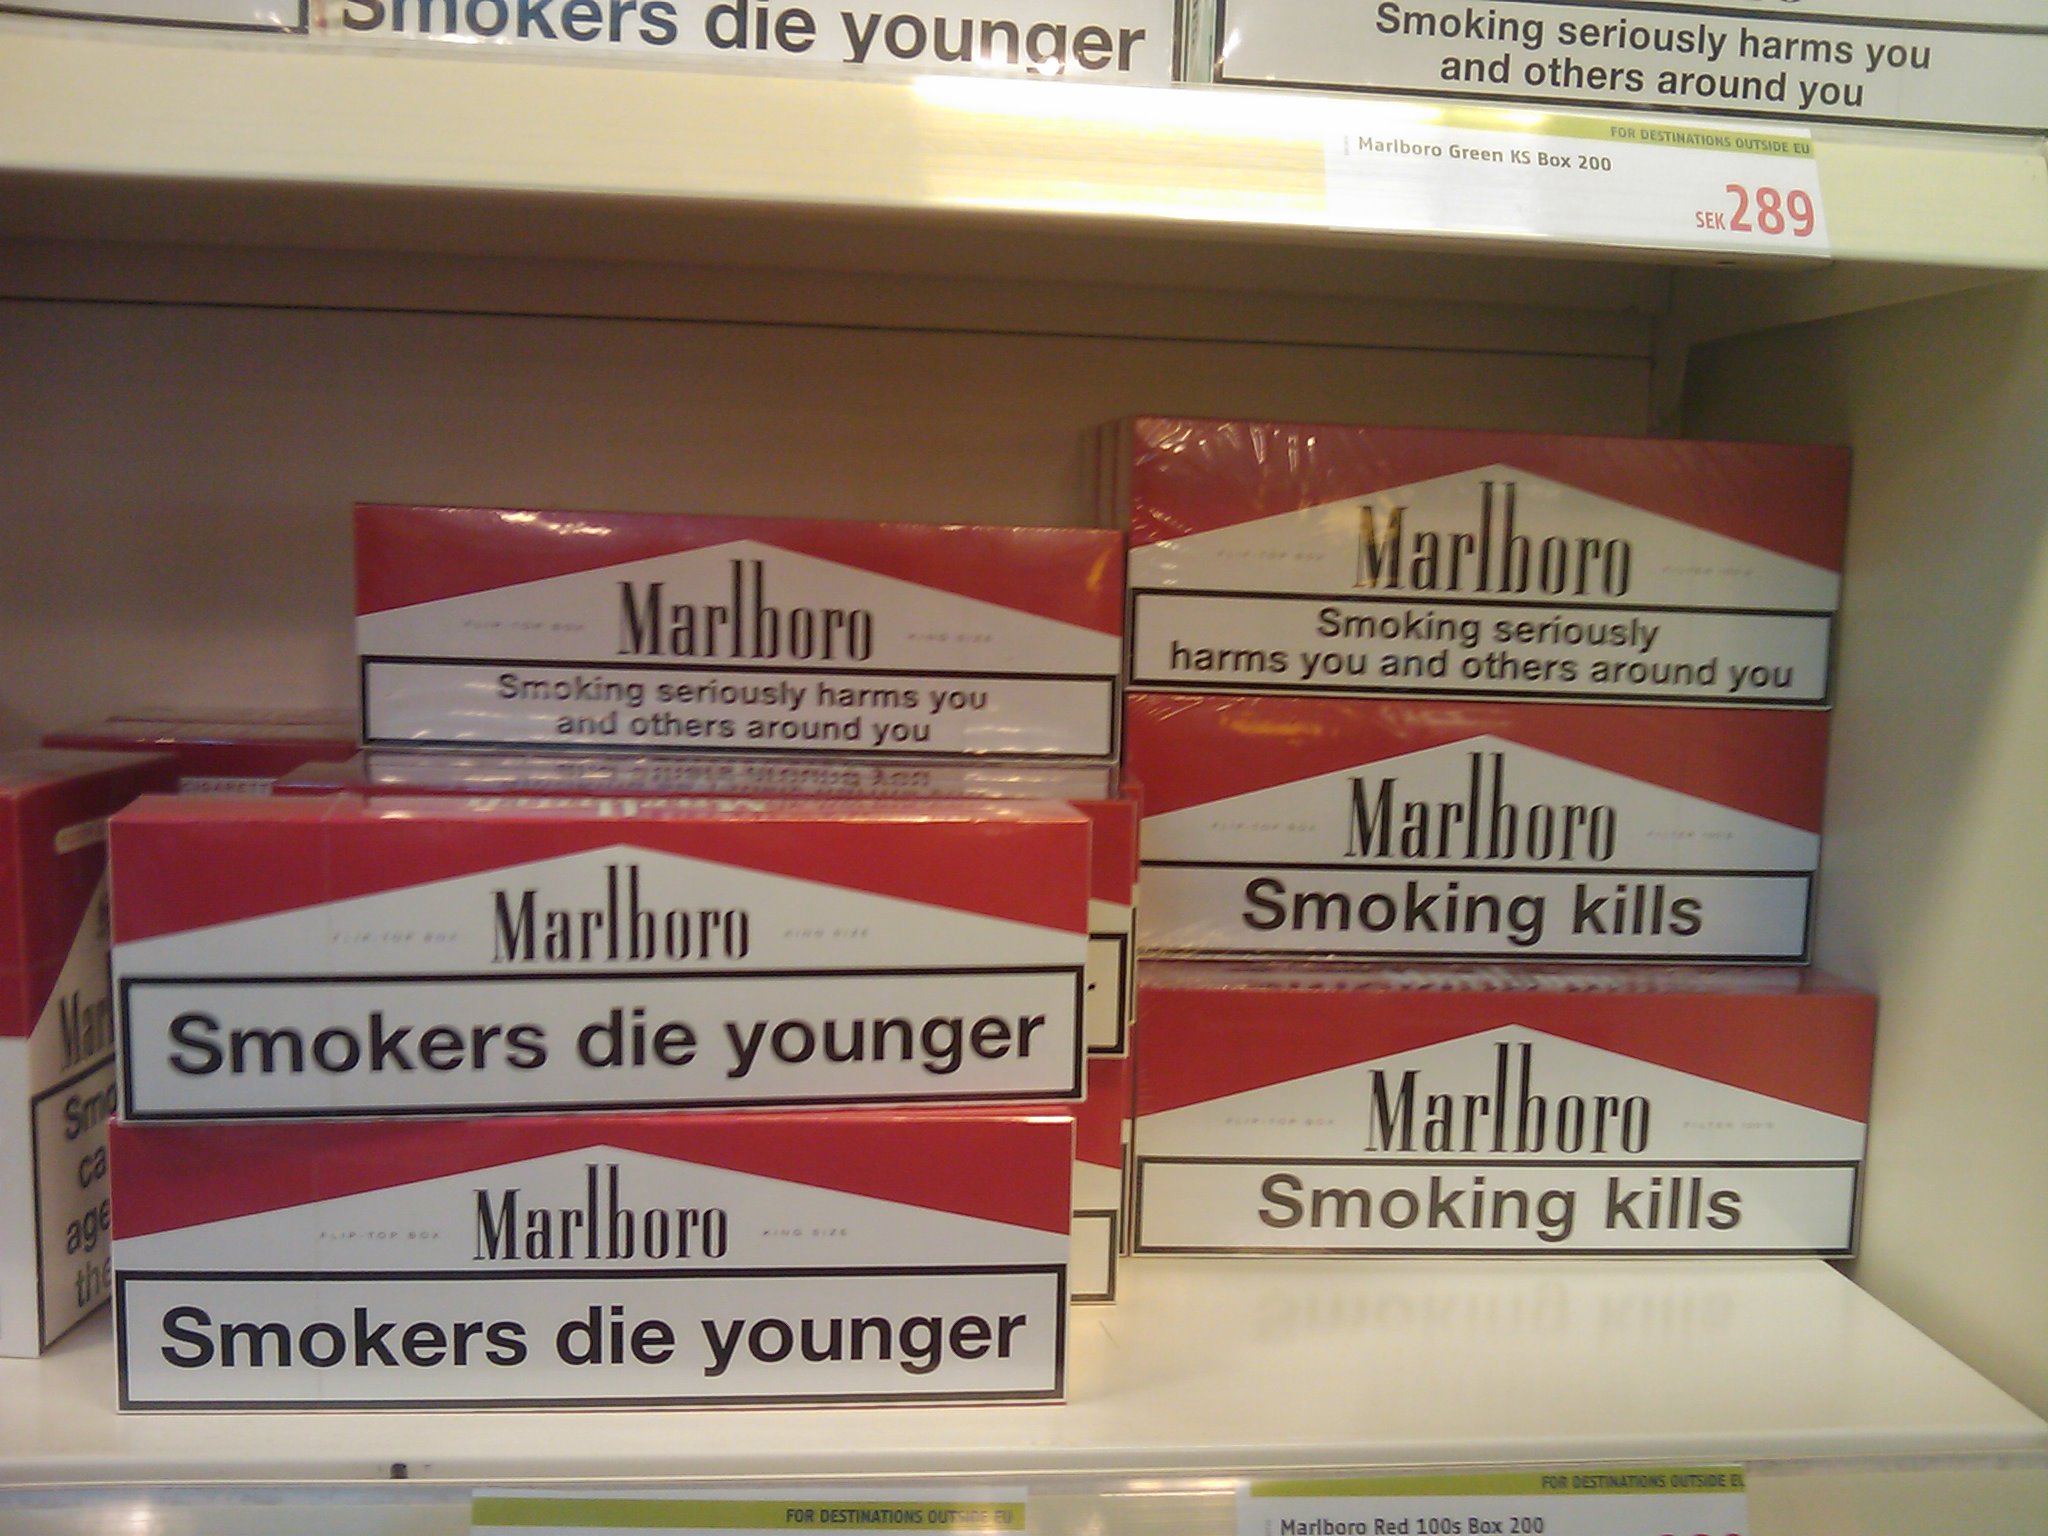 Scary Warning Labels!  Those really work, don't they?